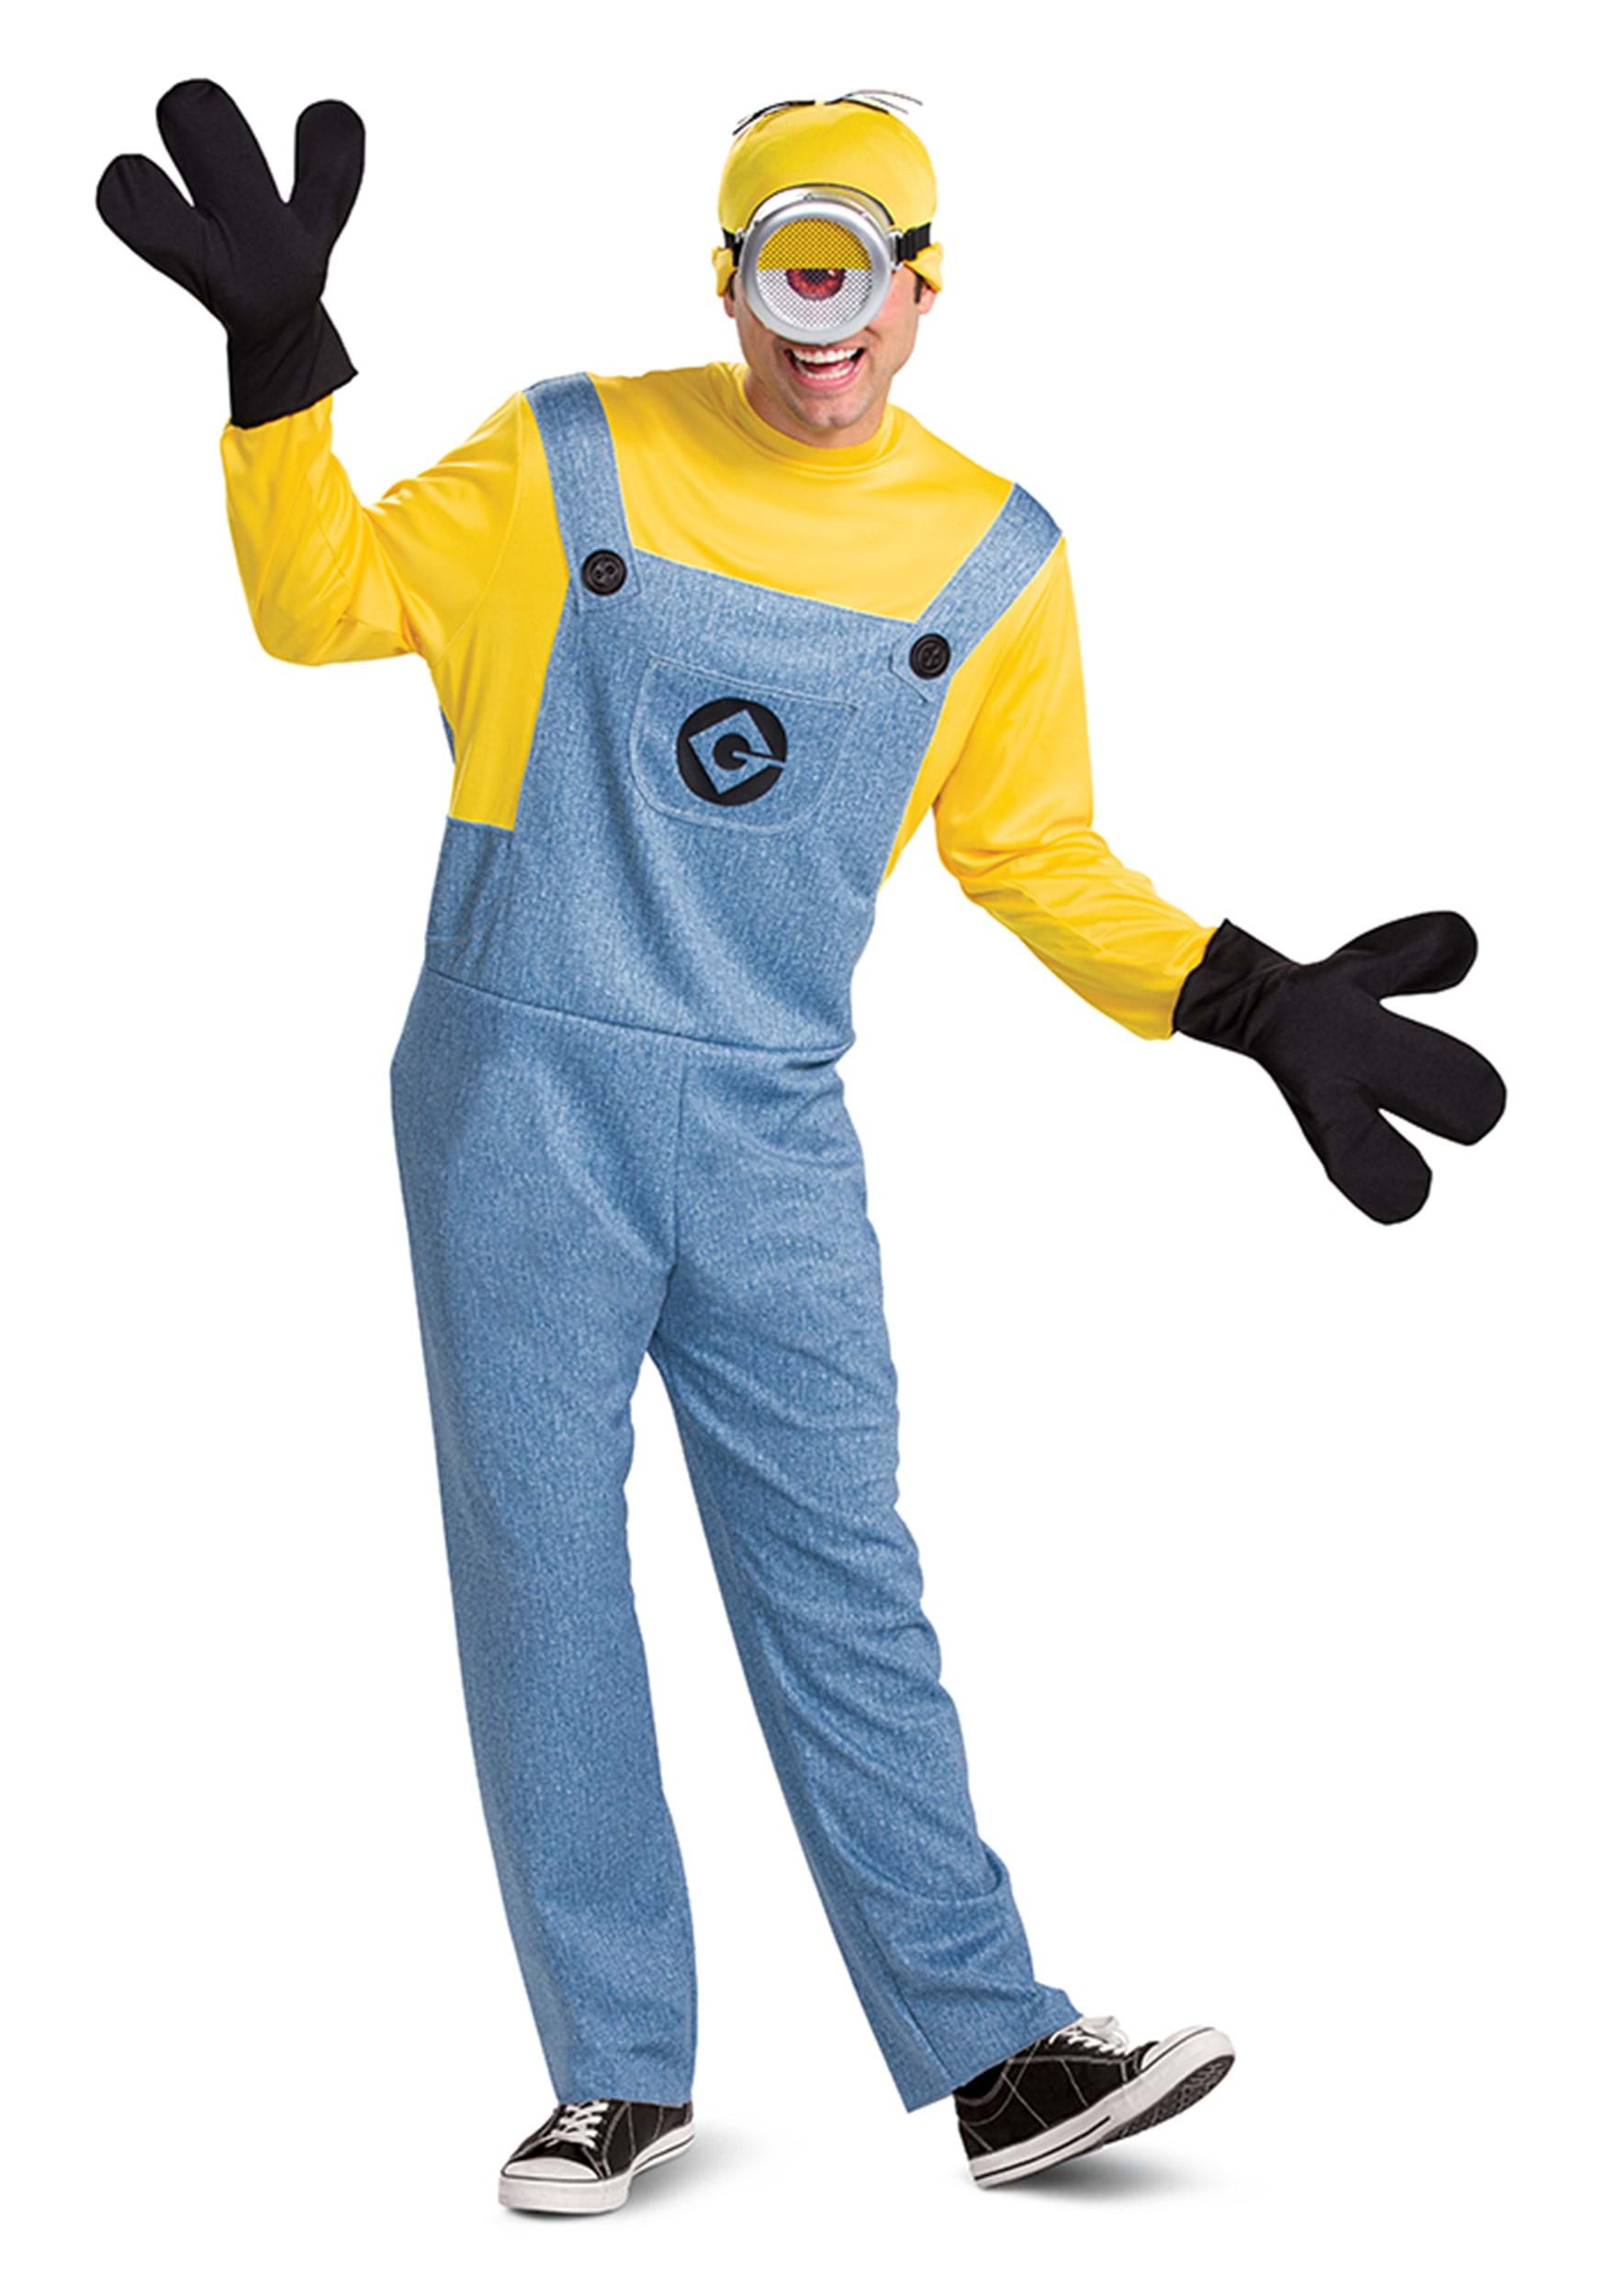 Image of Deluxe Adult Minion Costume ID DI119109-XL